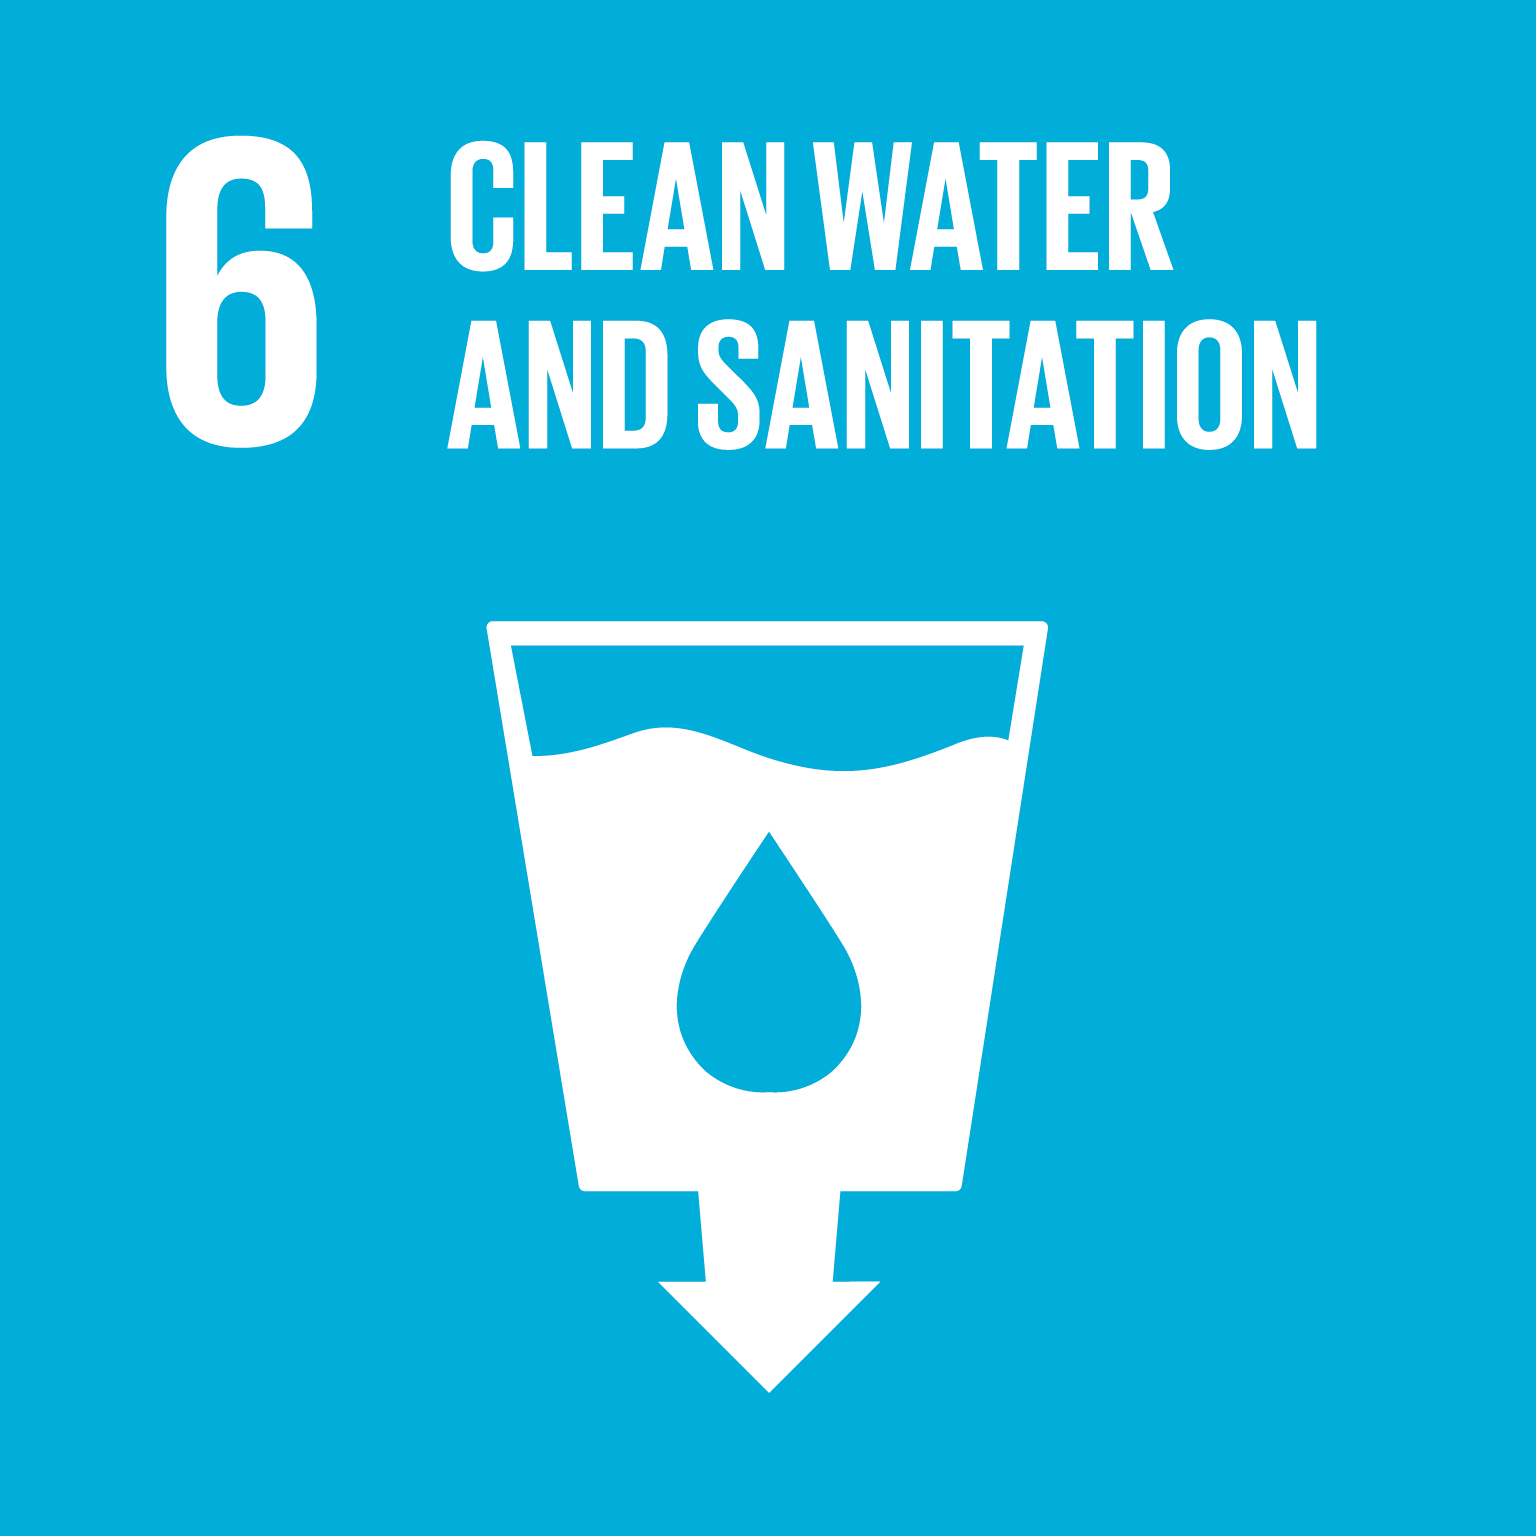 06 Clean water and sanitation